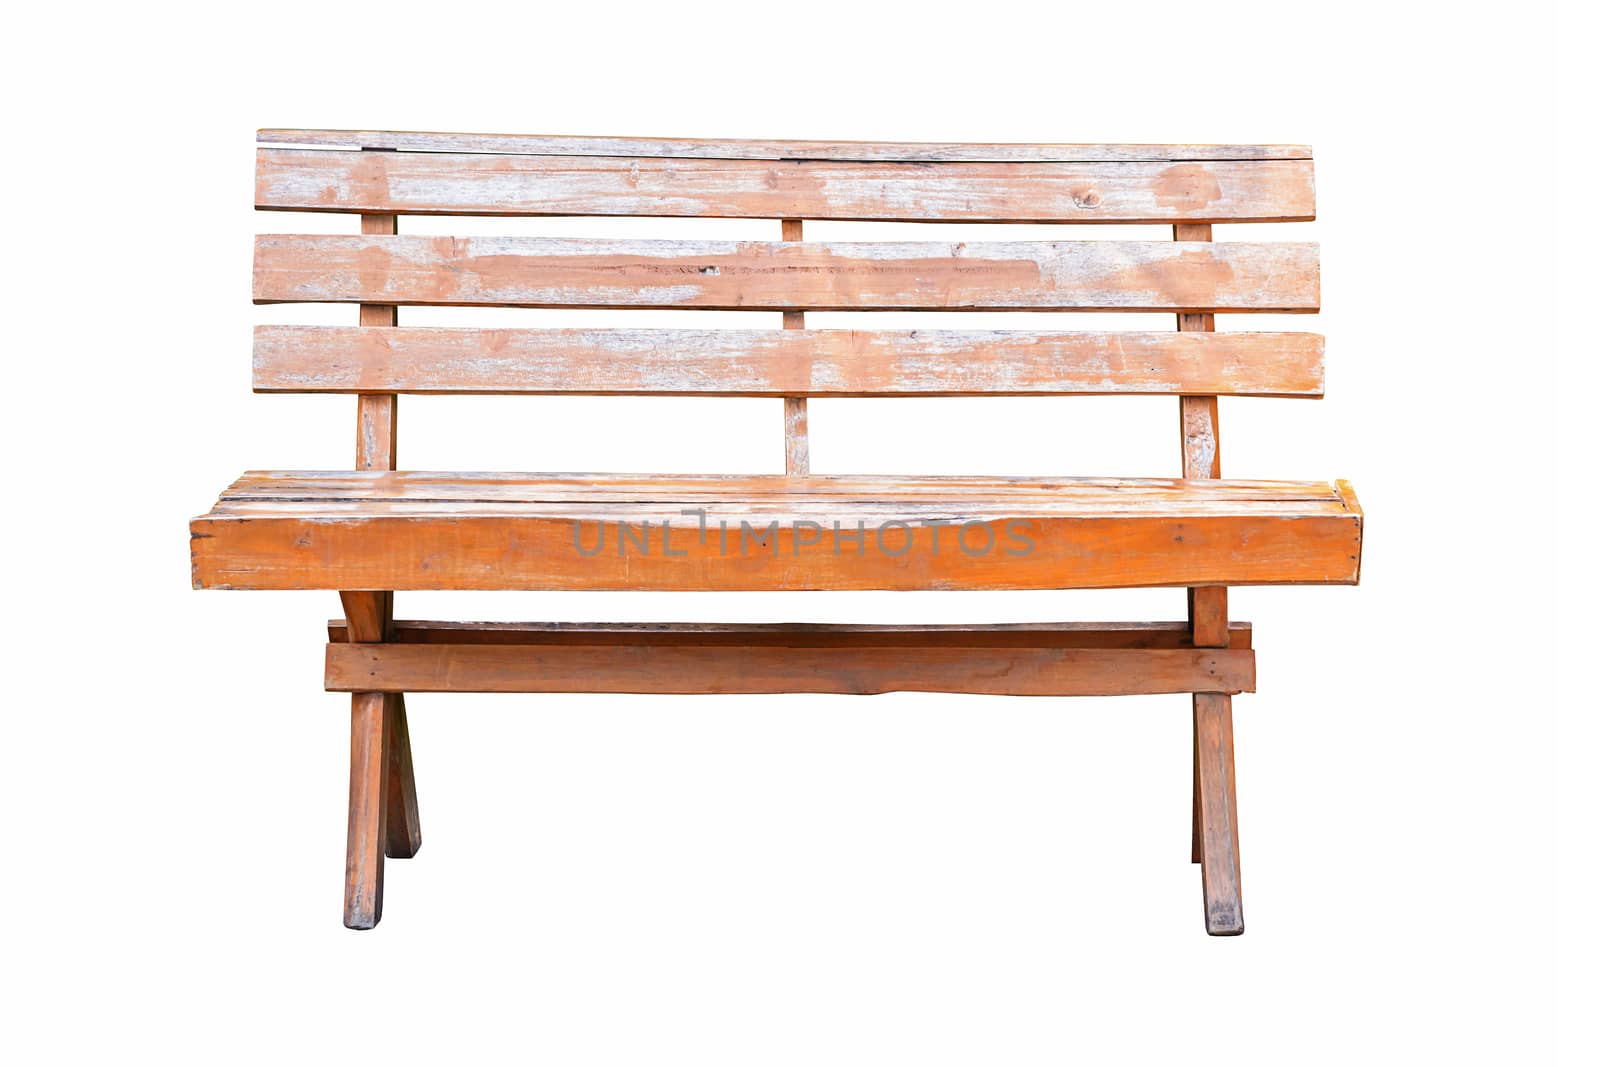 Old wooden bench isolated on white background with clipping path